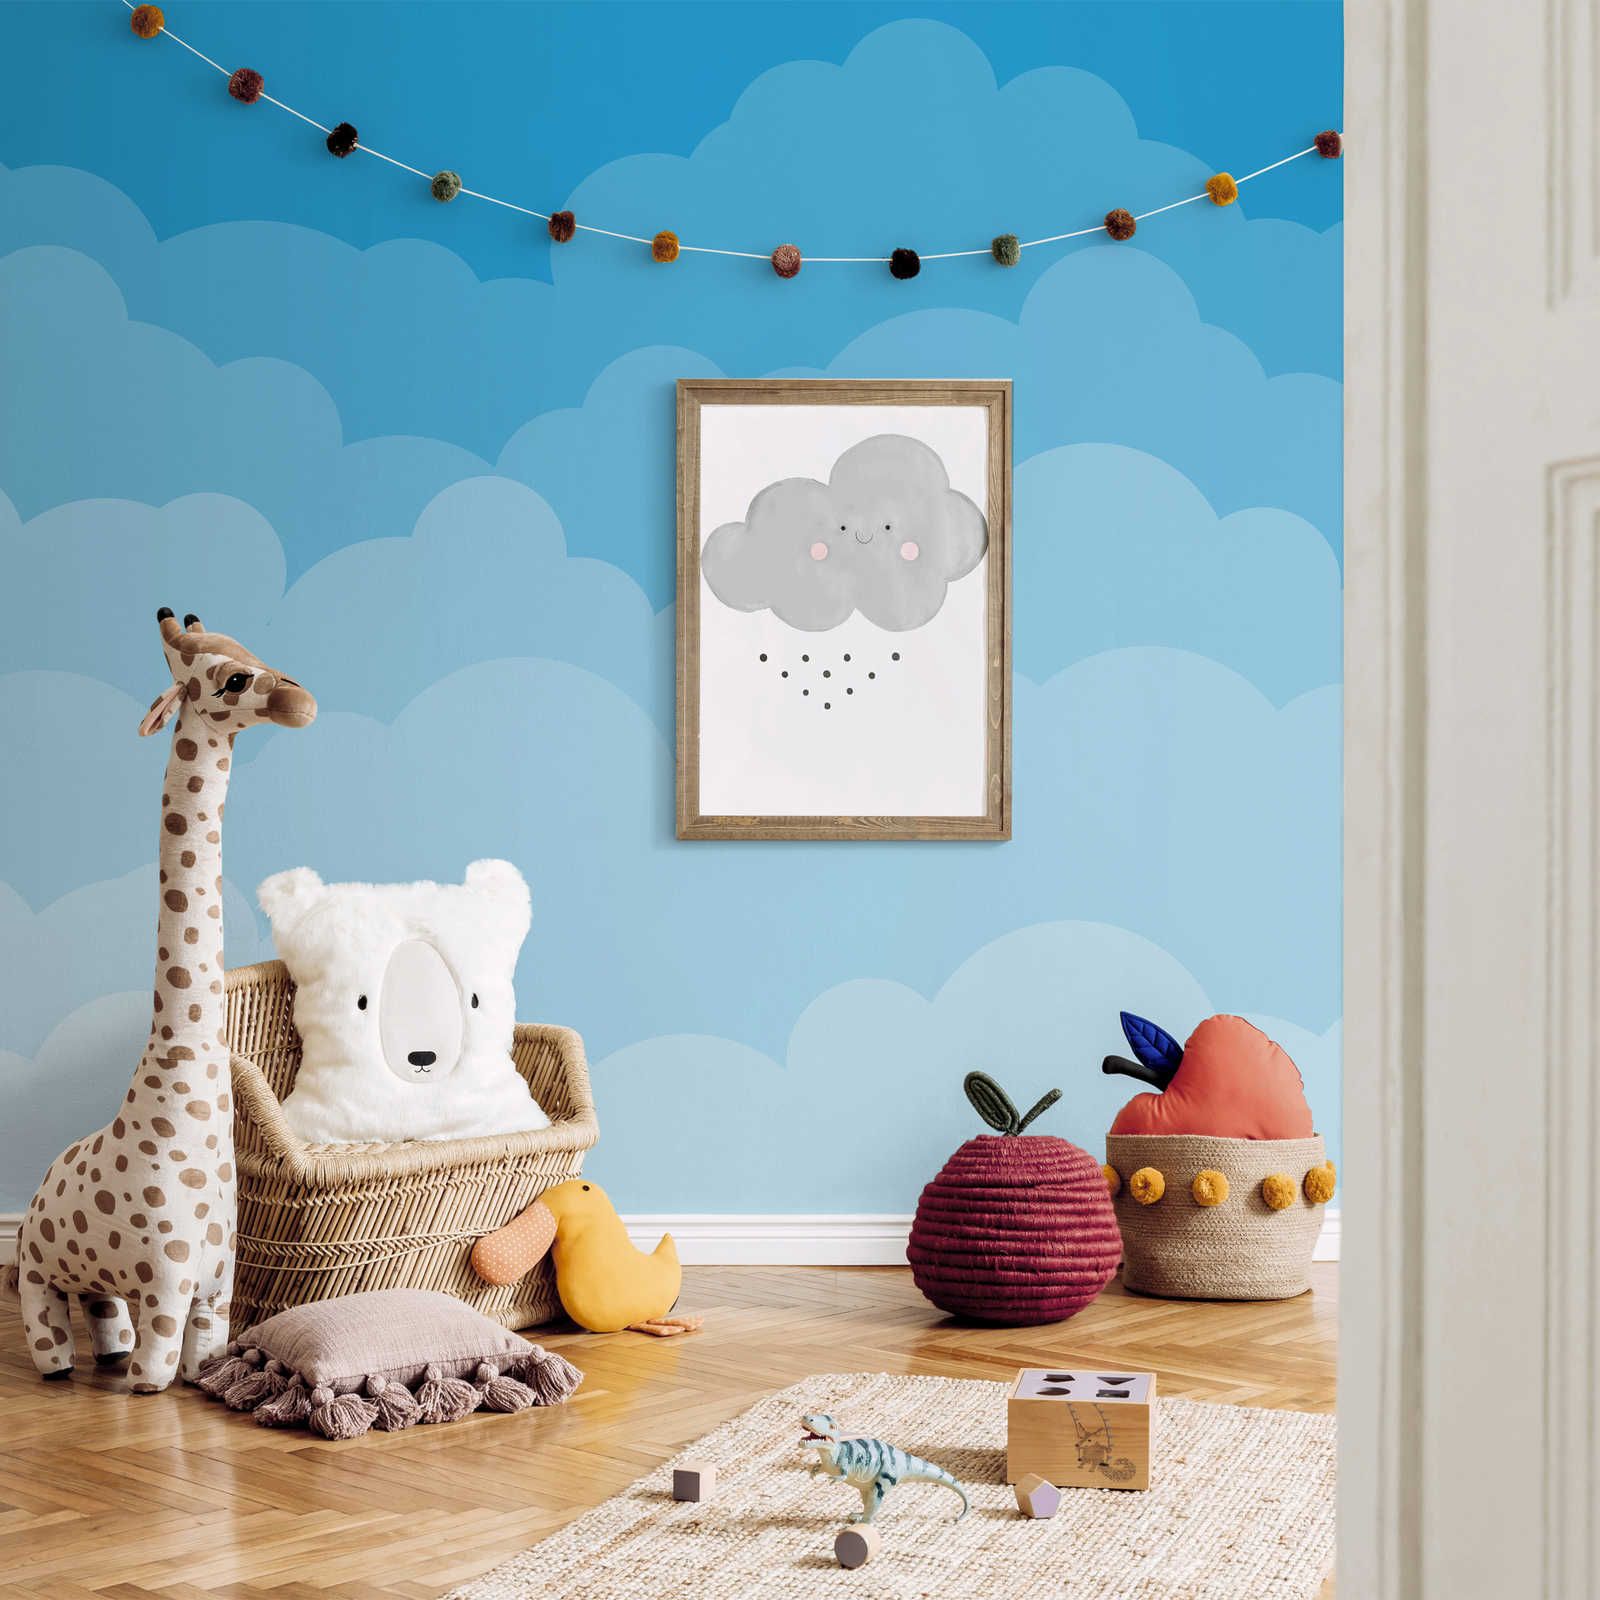 Comic Strip Style Sky with Clouds Wallpaper - Smooth & Pearlescent Non-woven
